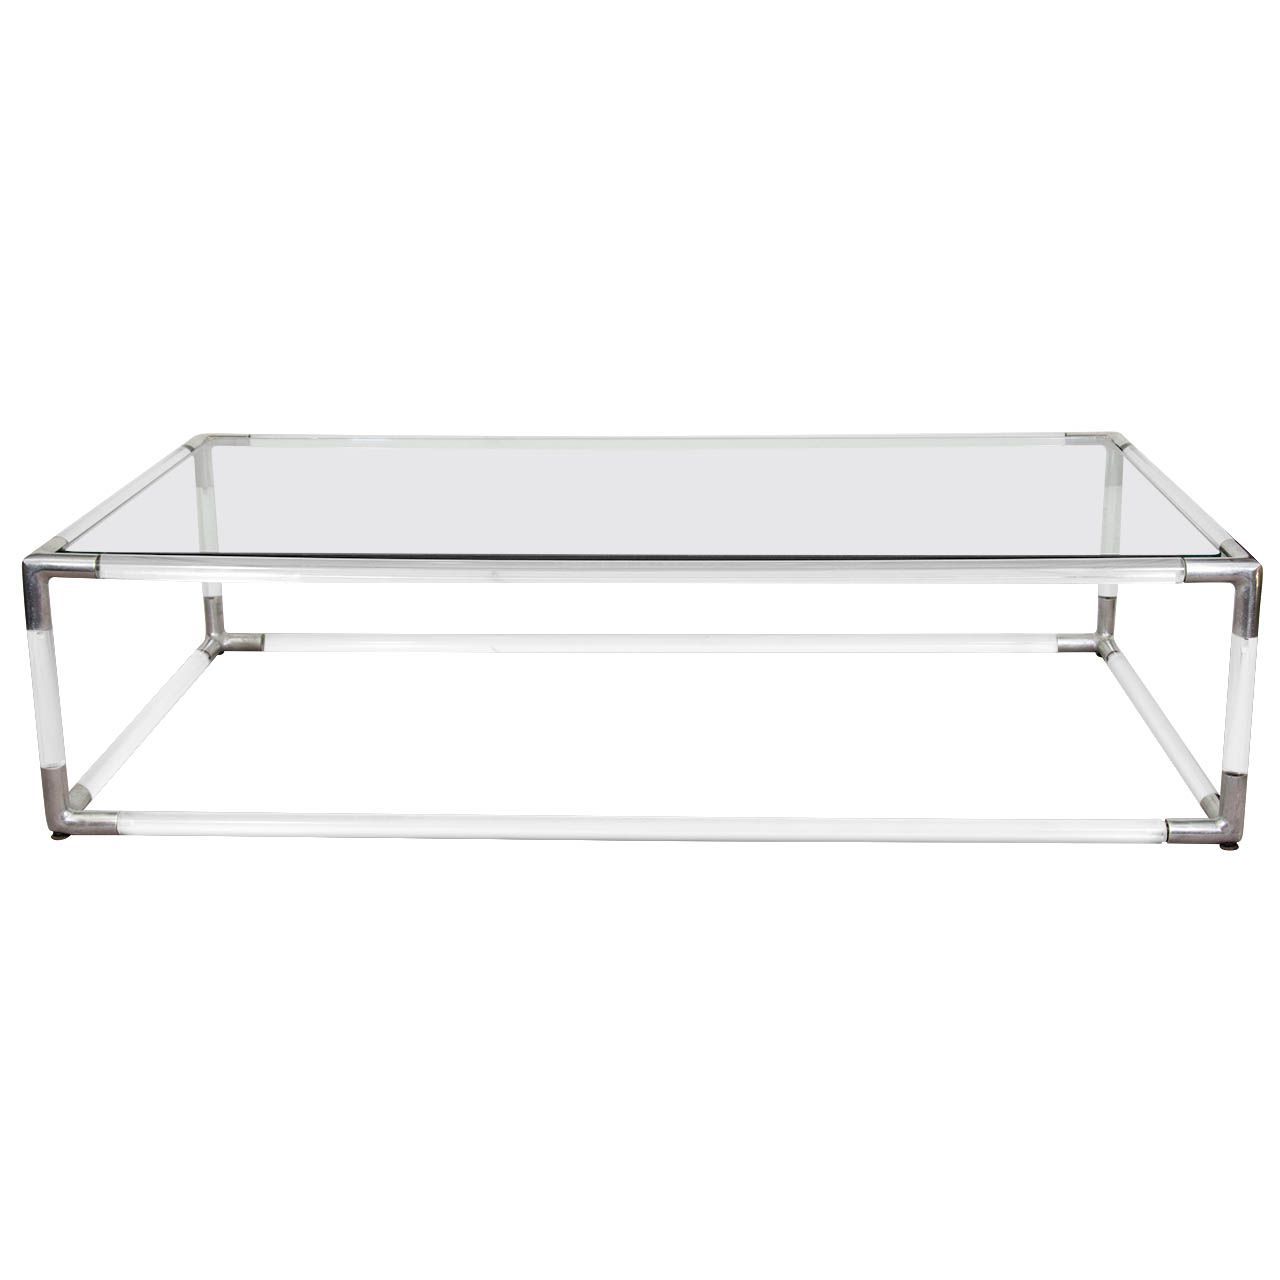 2018 Mid Century Lucite And Chrome Rectangular Coffee Table W In Chrome And Glass Rectangular Coffee Tables (View 12 of 20)